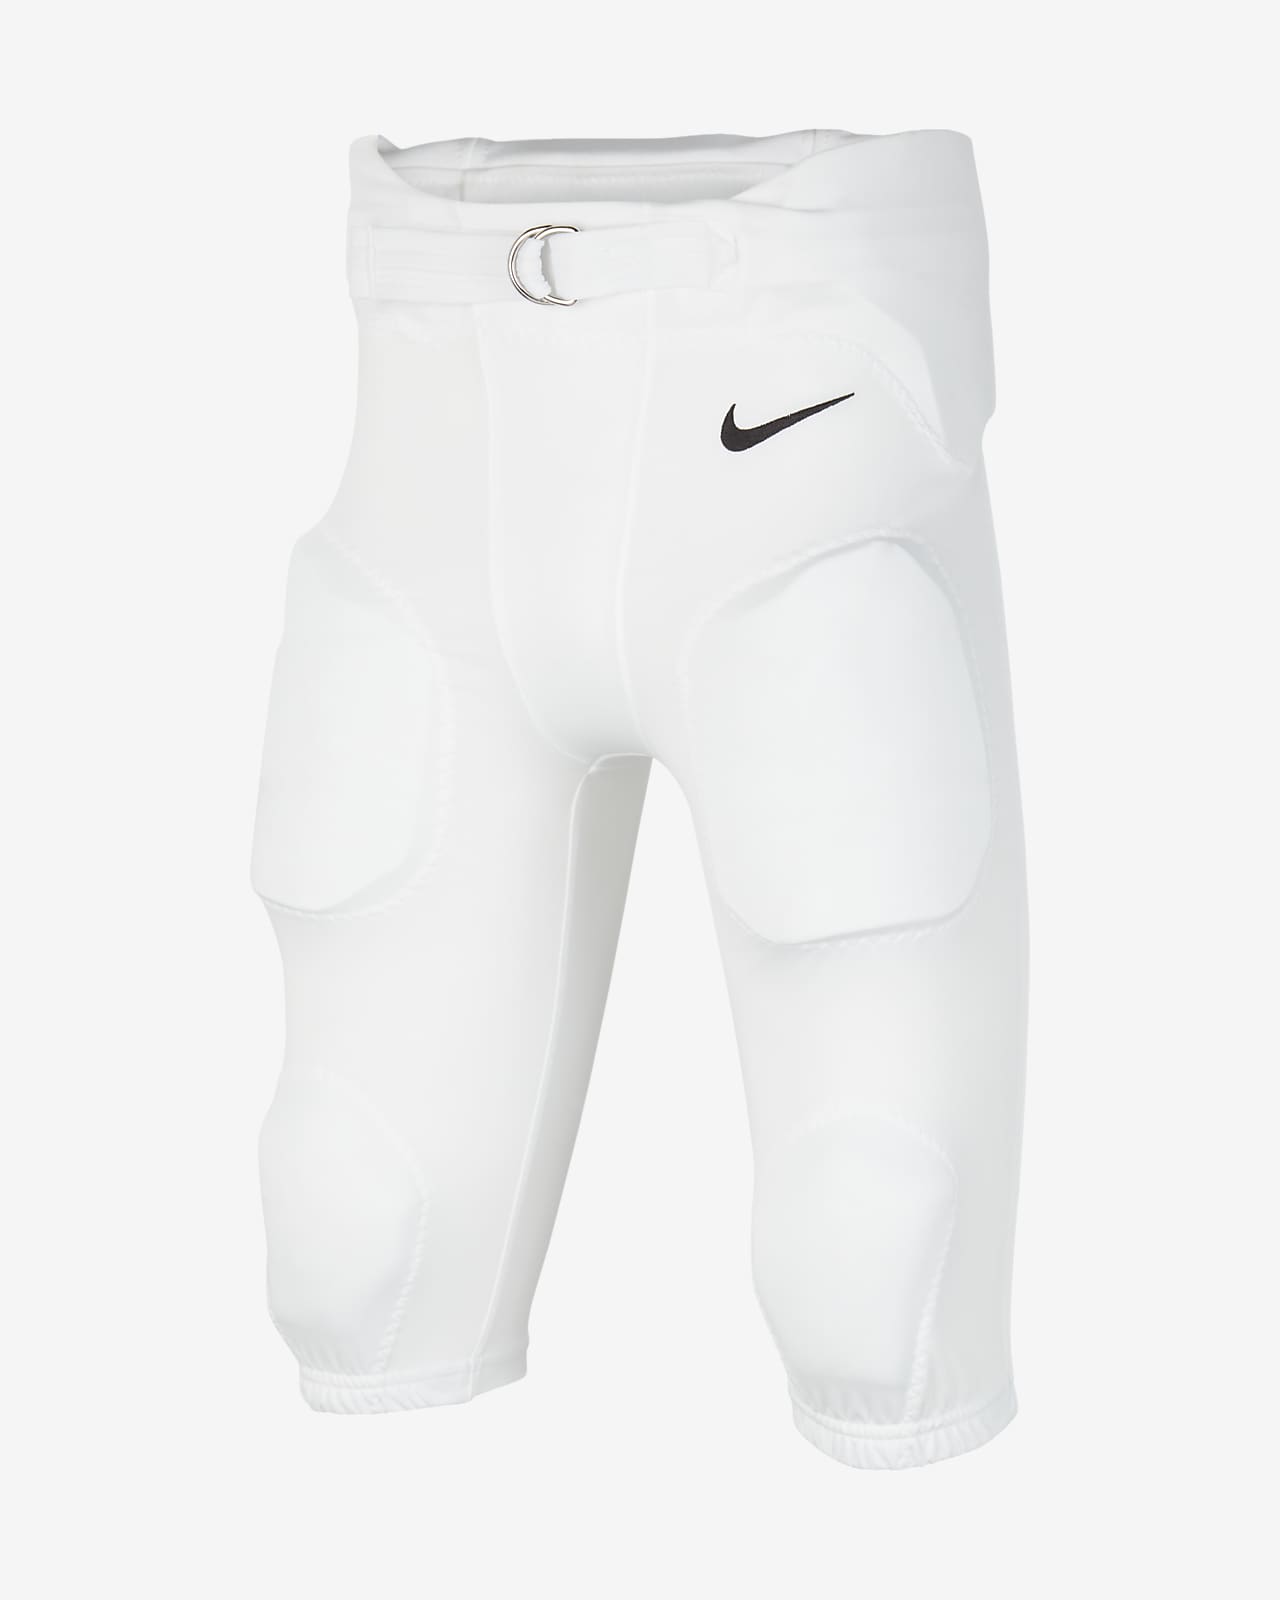 Under Armour Integrated Padding Football Pants - Youth Boys Sz S